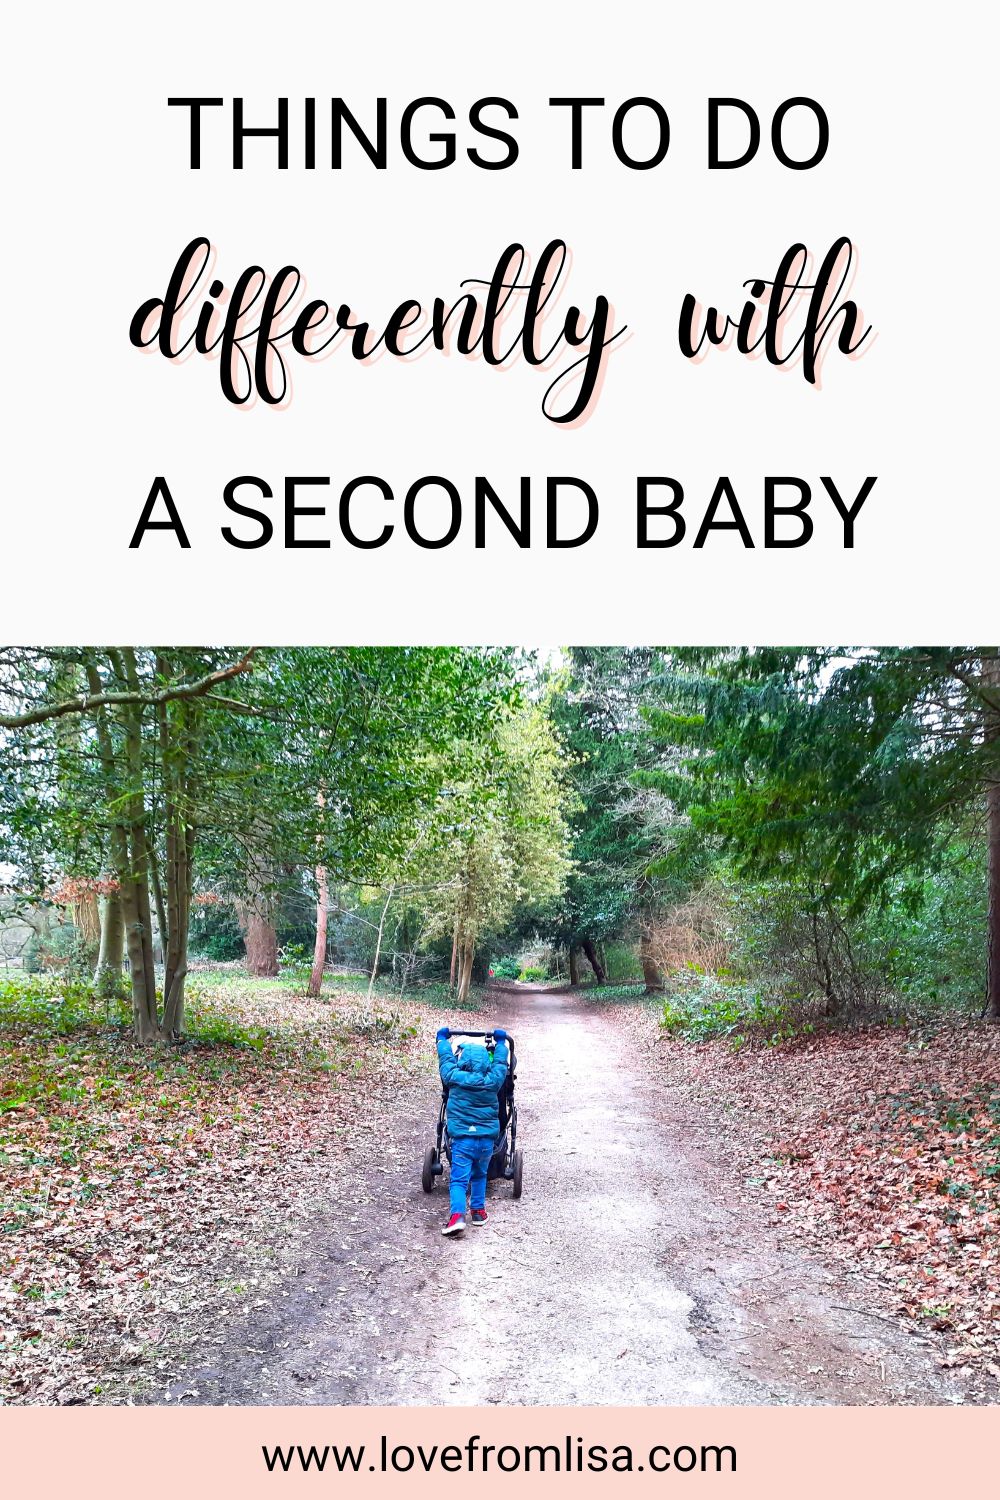 Things to do differently with second baby Pinterest graphic